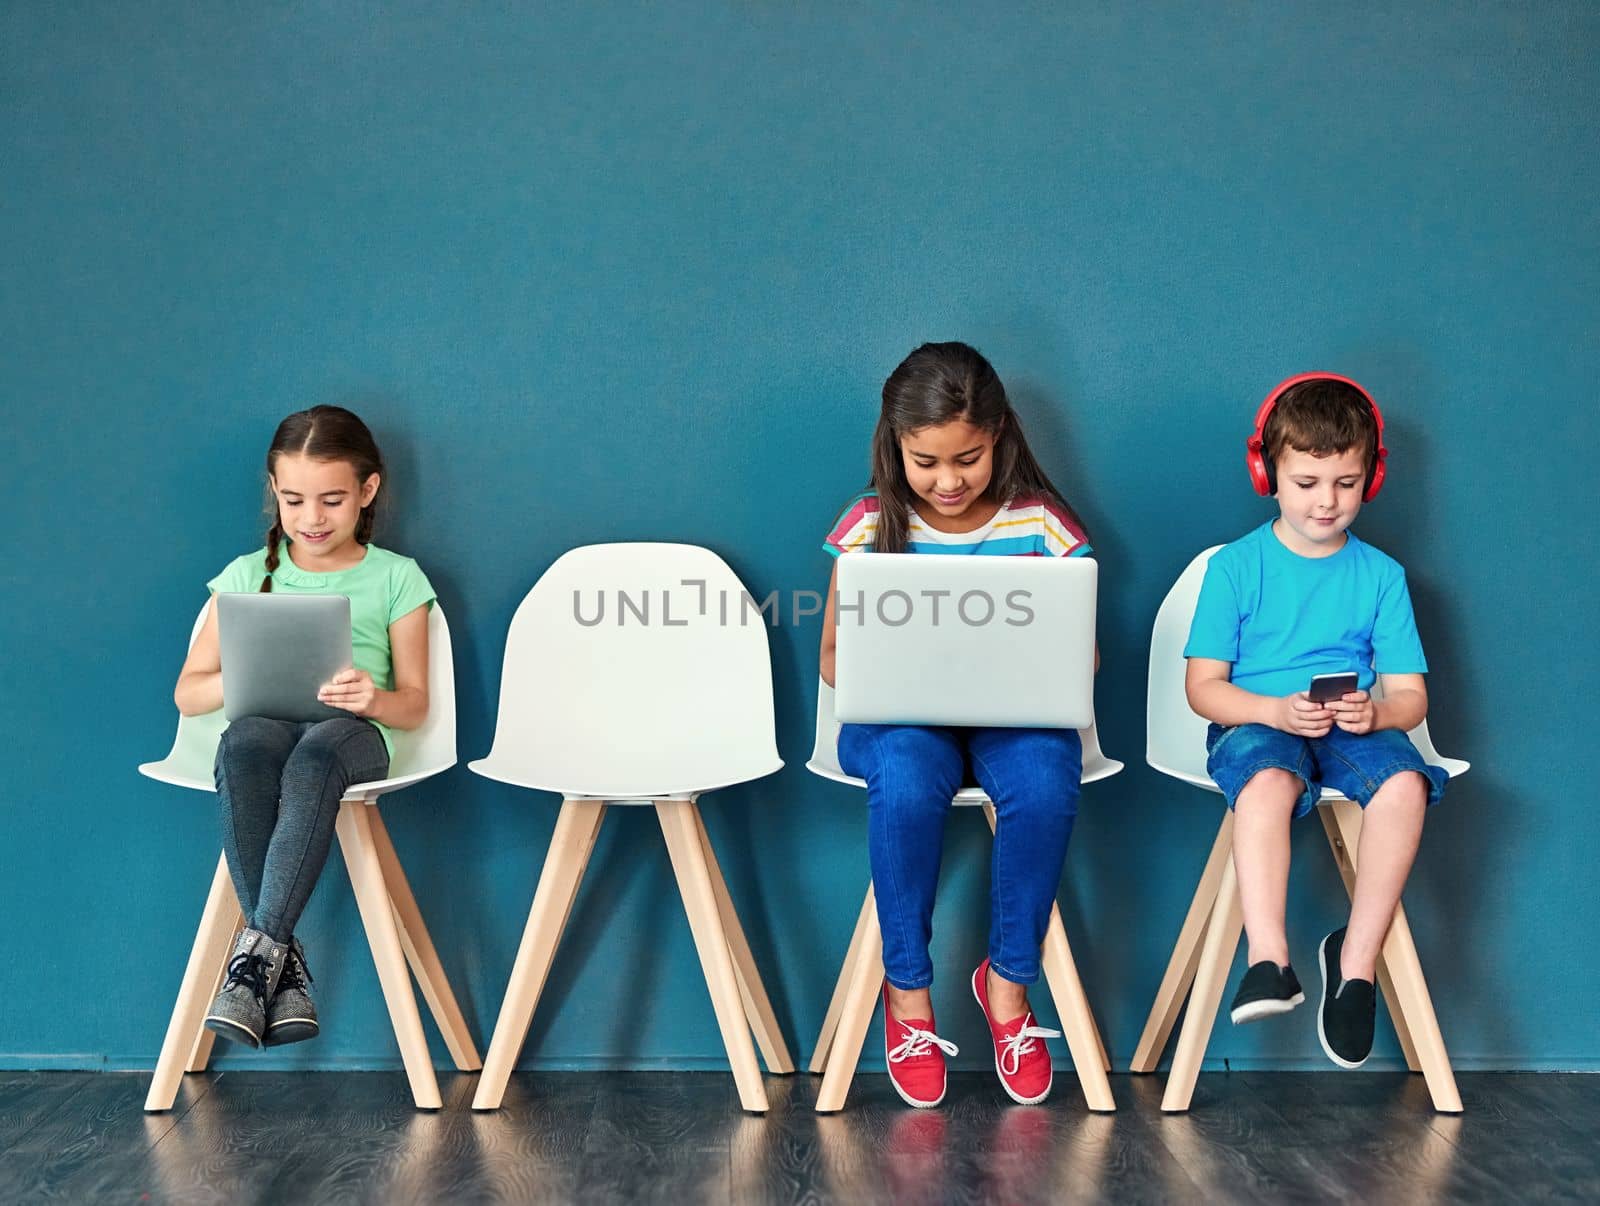 Growing up in a wireless world. Studio shot of kids sitting on chairs and using wireless technology against a blue background. by YuriArcurs